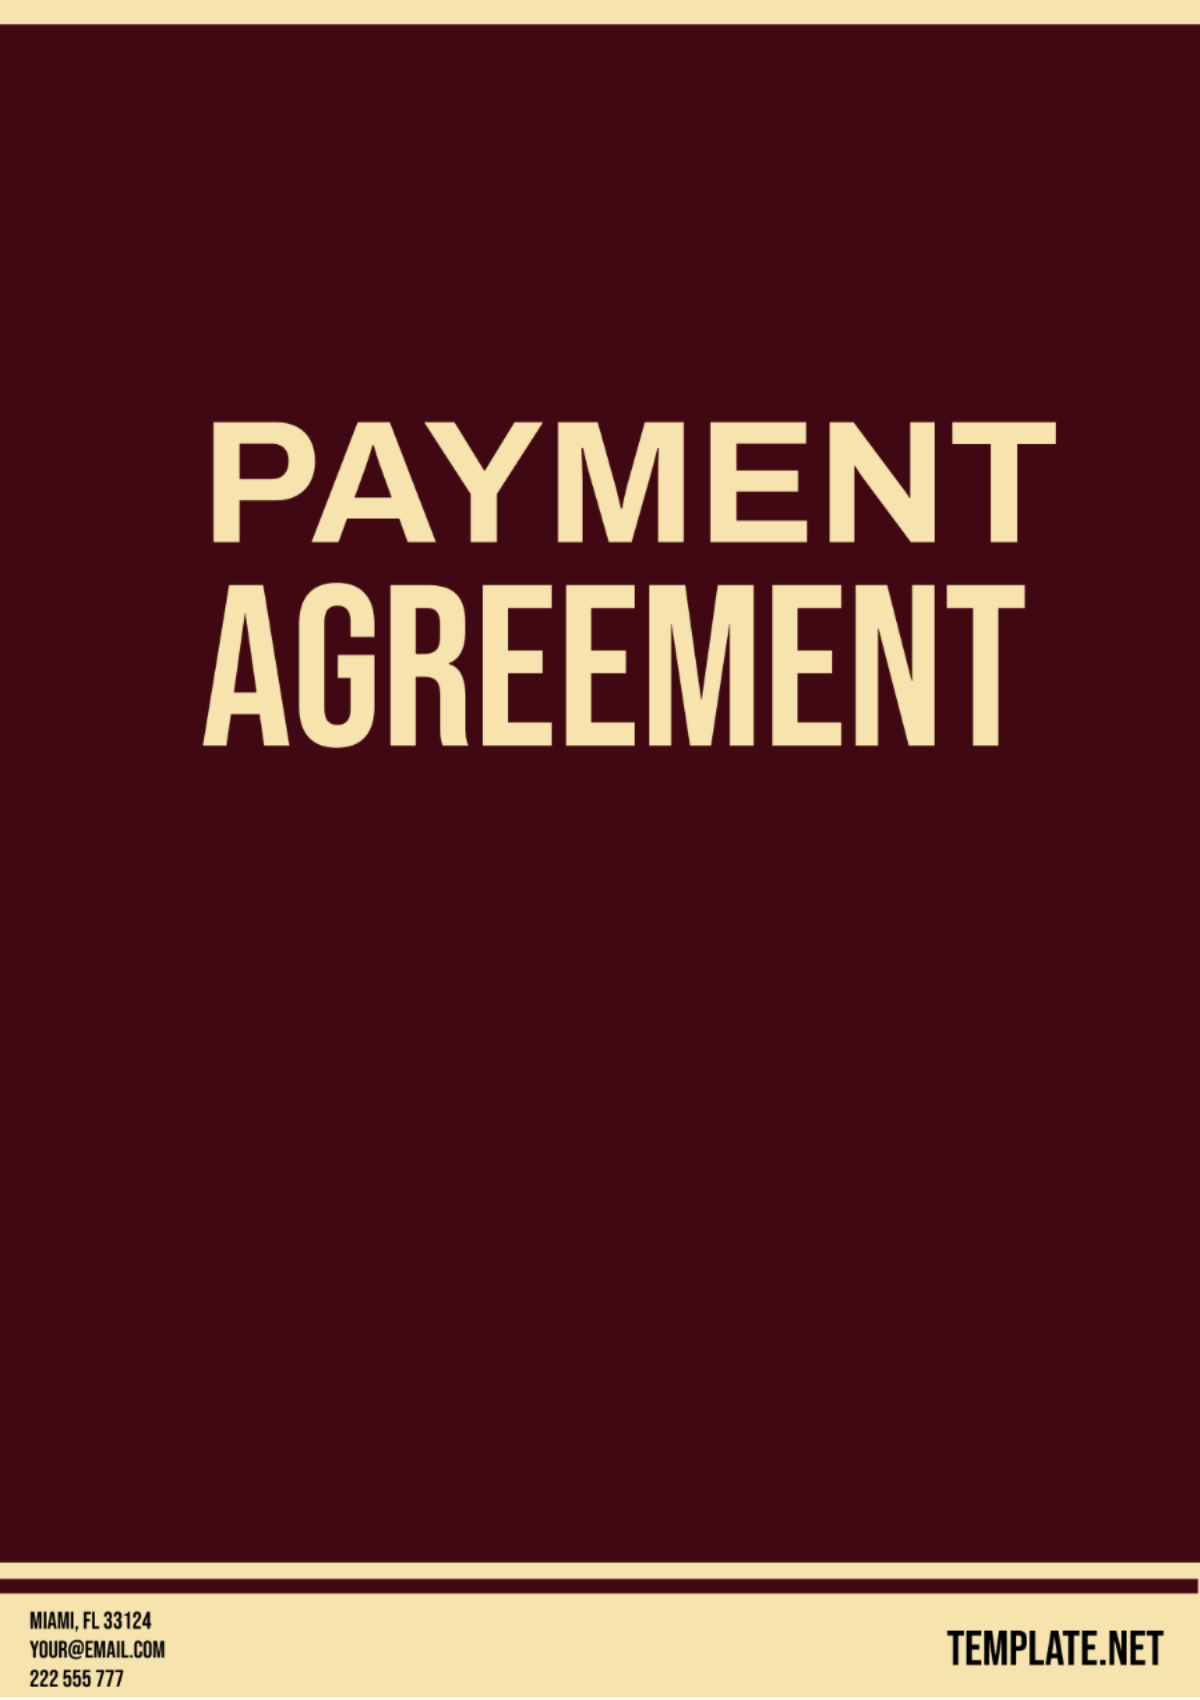 Payment Agreement Template